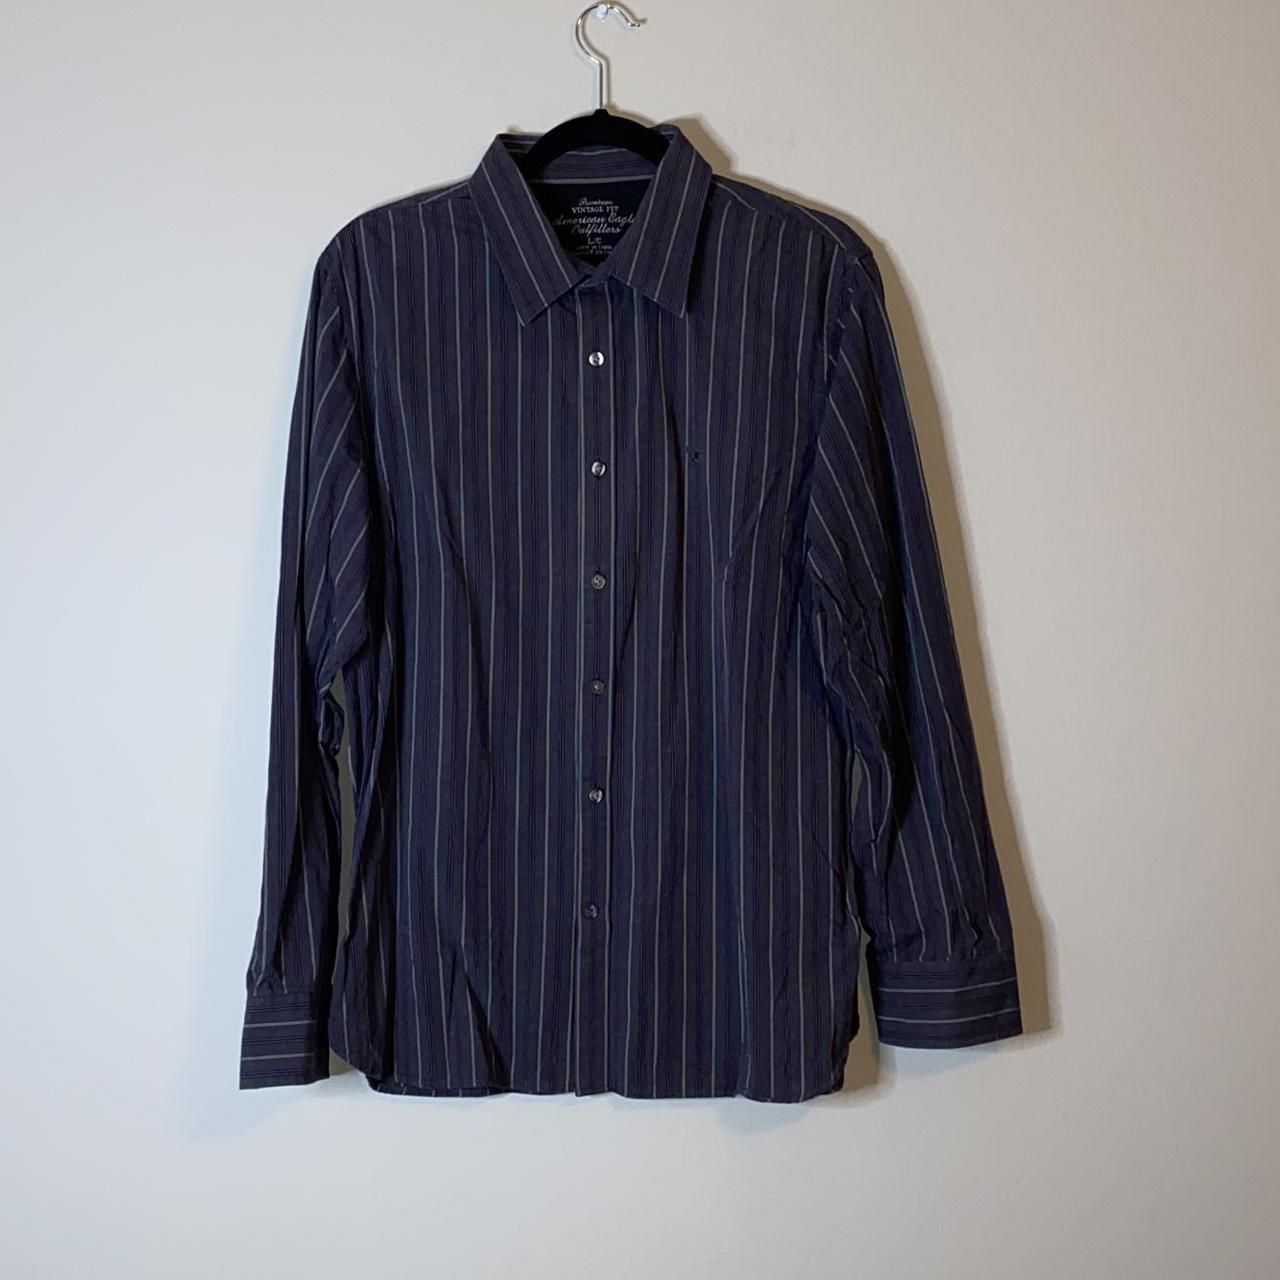 Product Image 1 - American Eagle Outfitters Men’s pinstripe